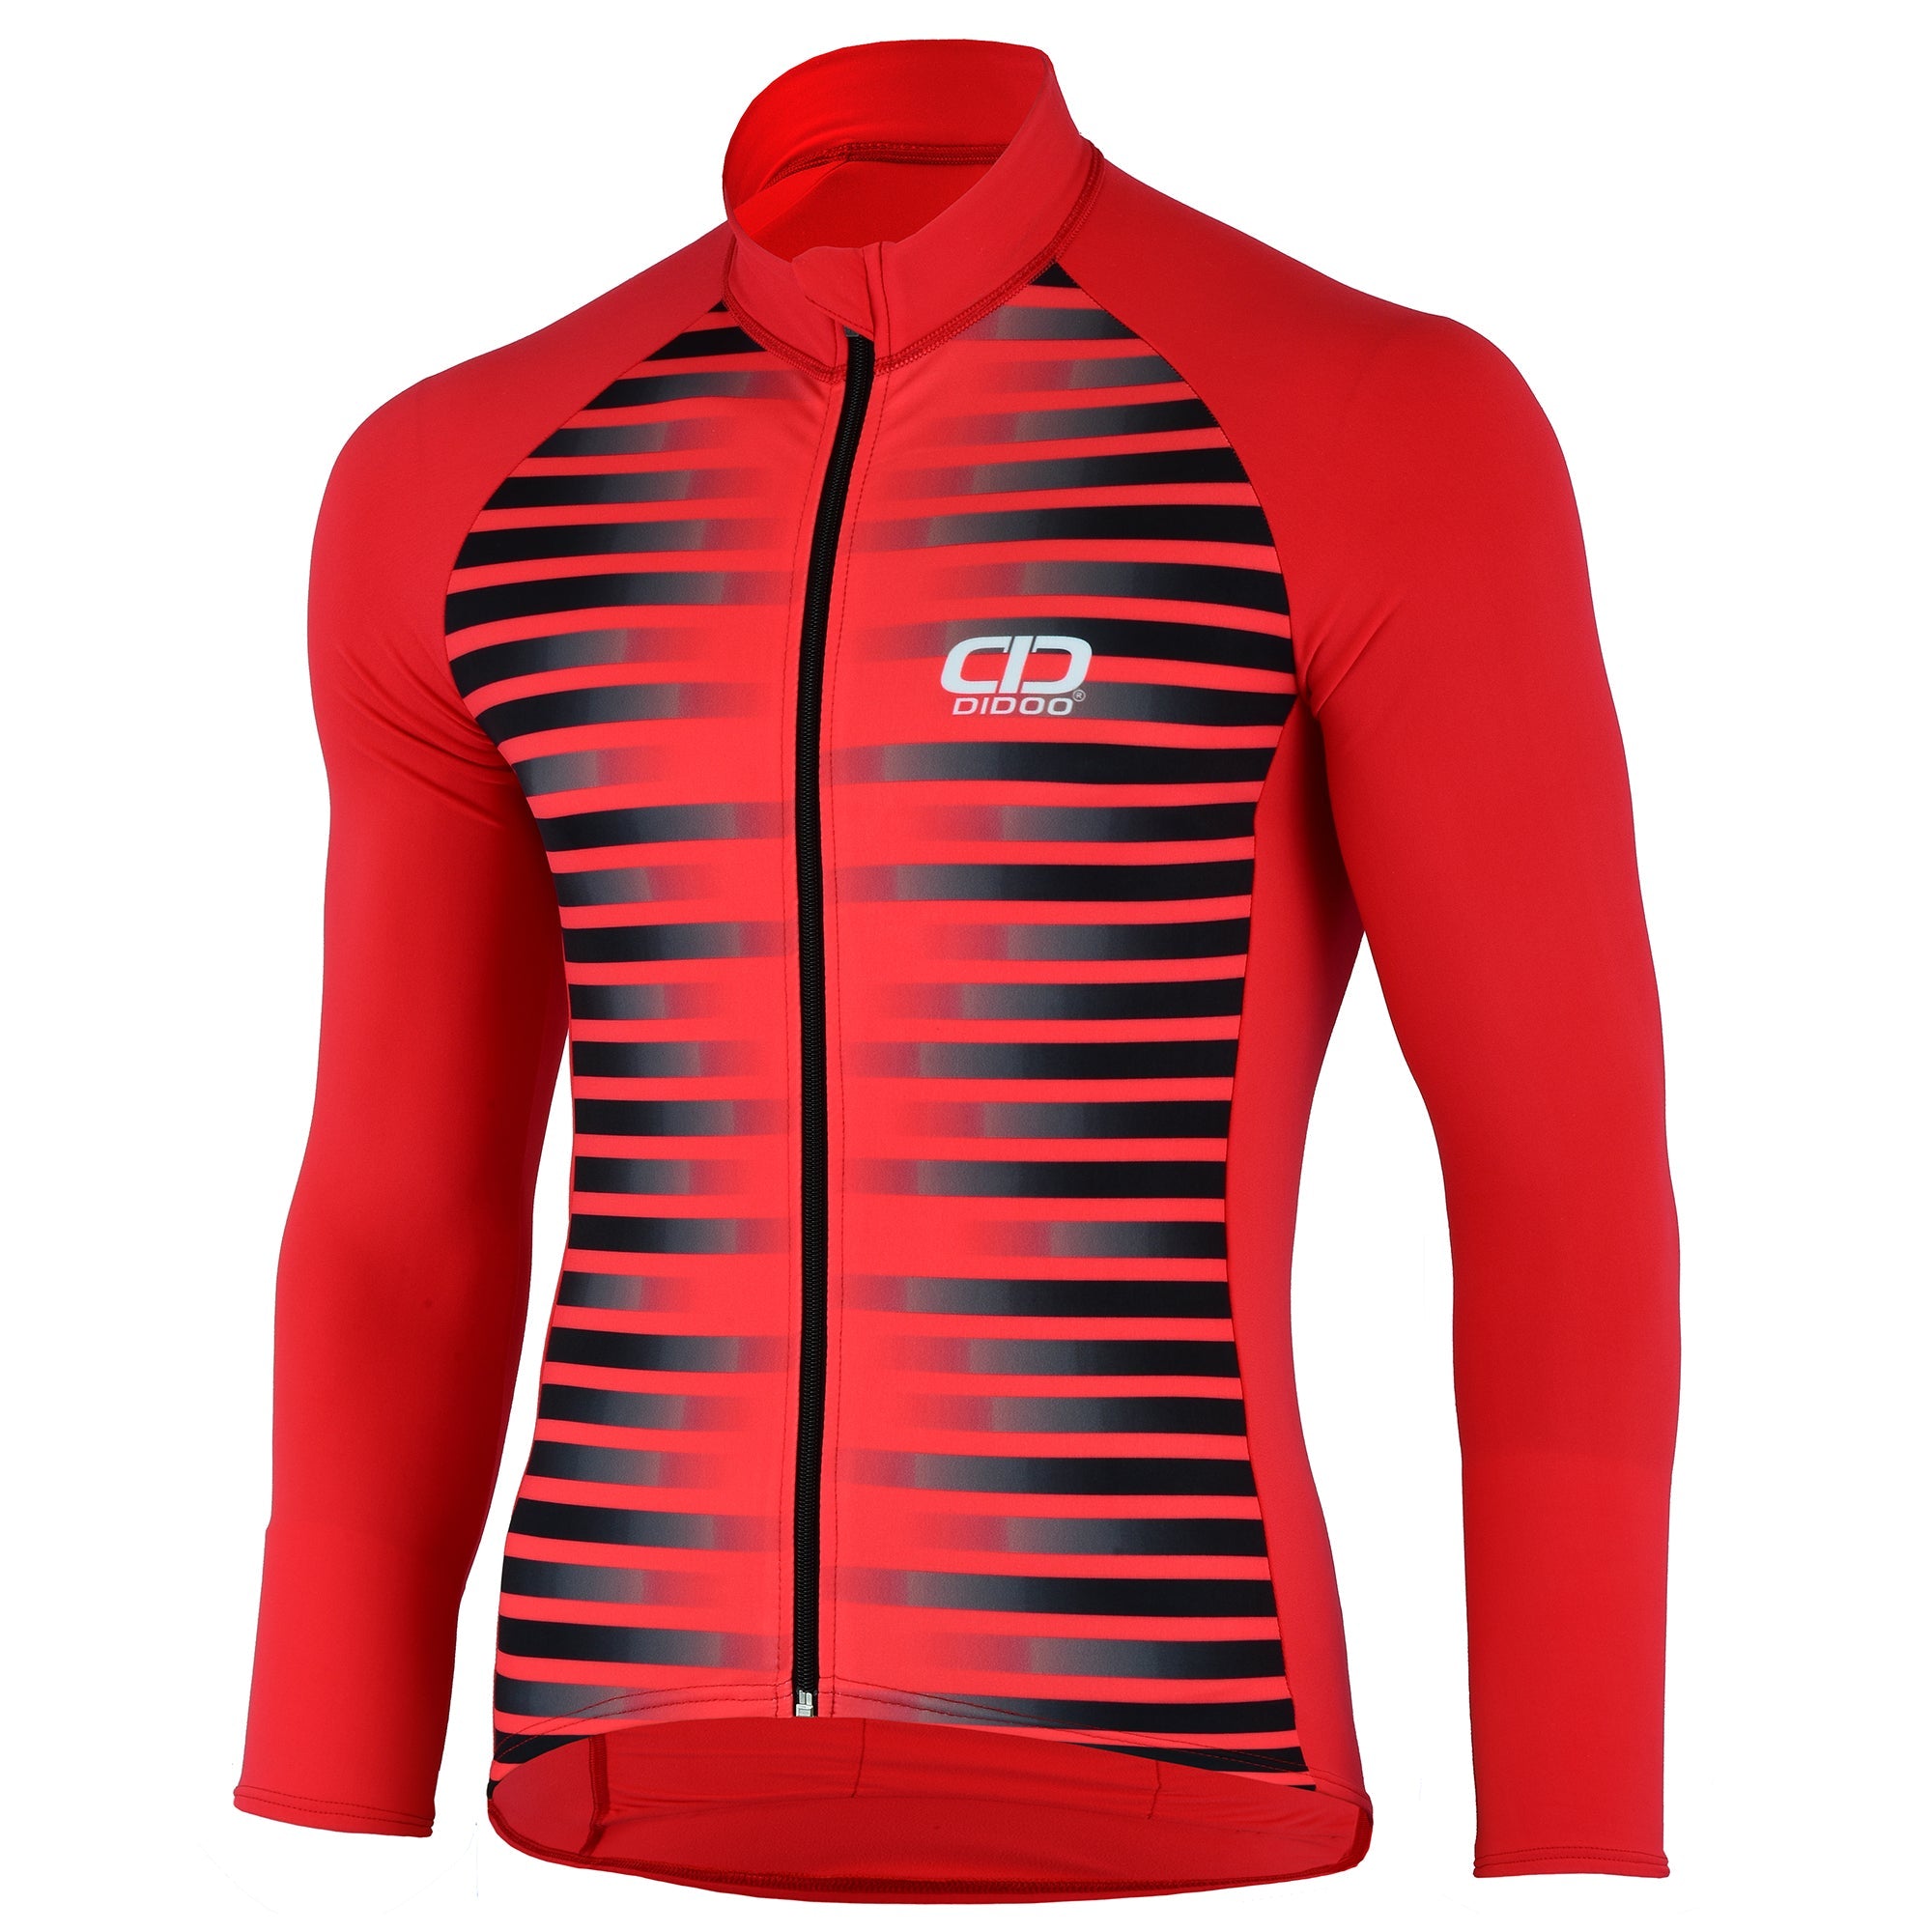 DiDOO Men’s Pro long sleeve winter cycling jersey in Red and Black colour